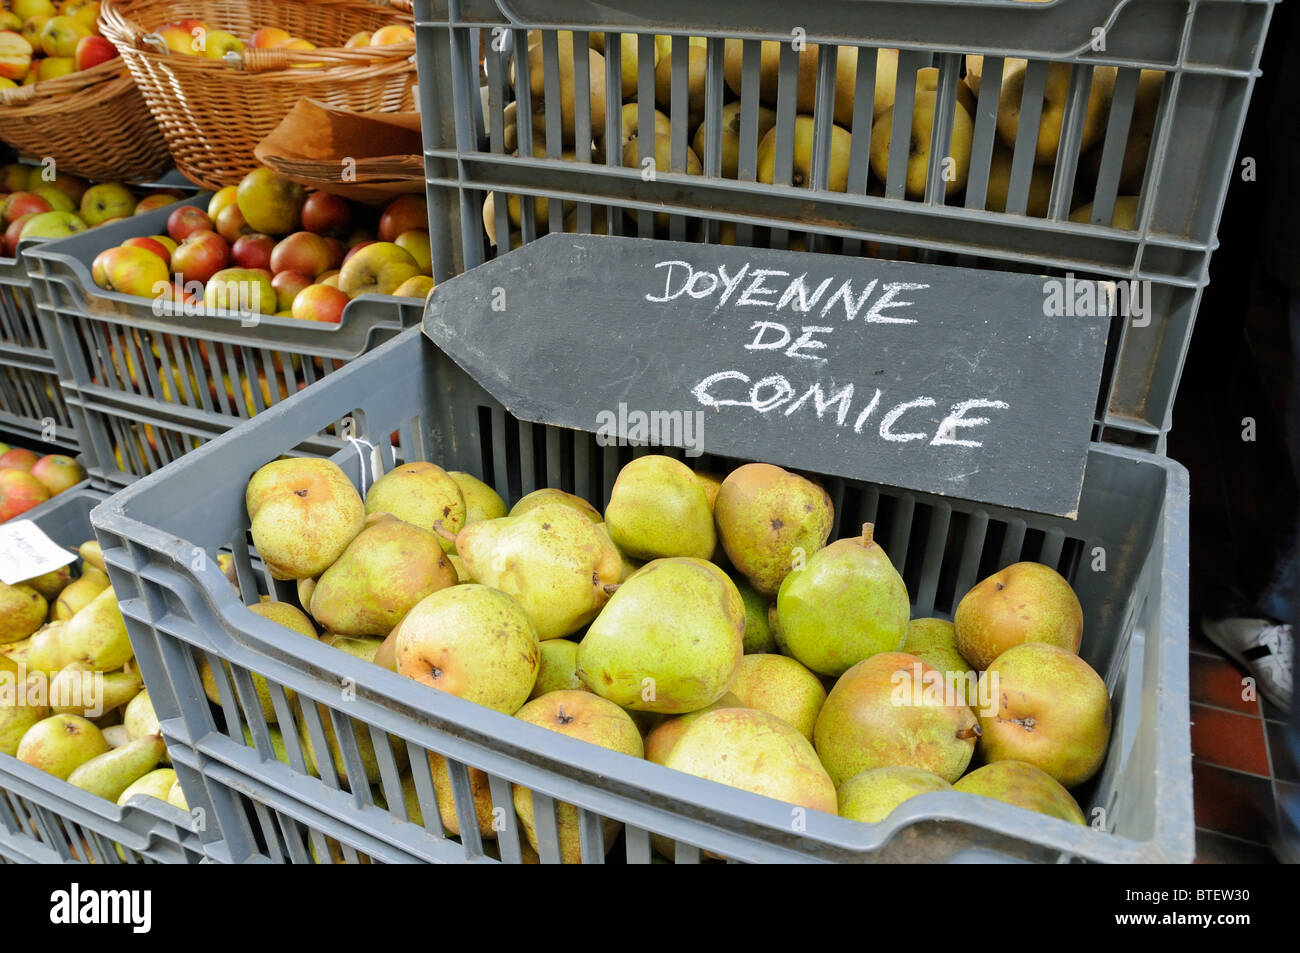 Doyenne De Comice Pears with attractive chalk sign in container outside shop in Covent Garden London England UK Stock Photo